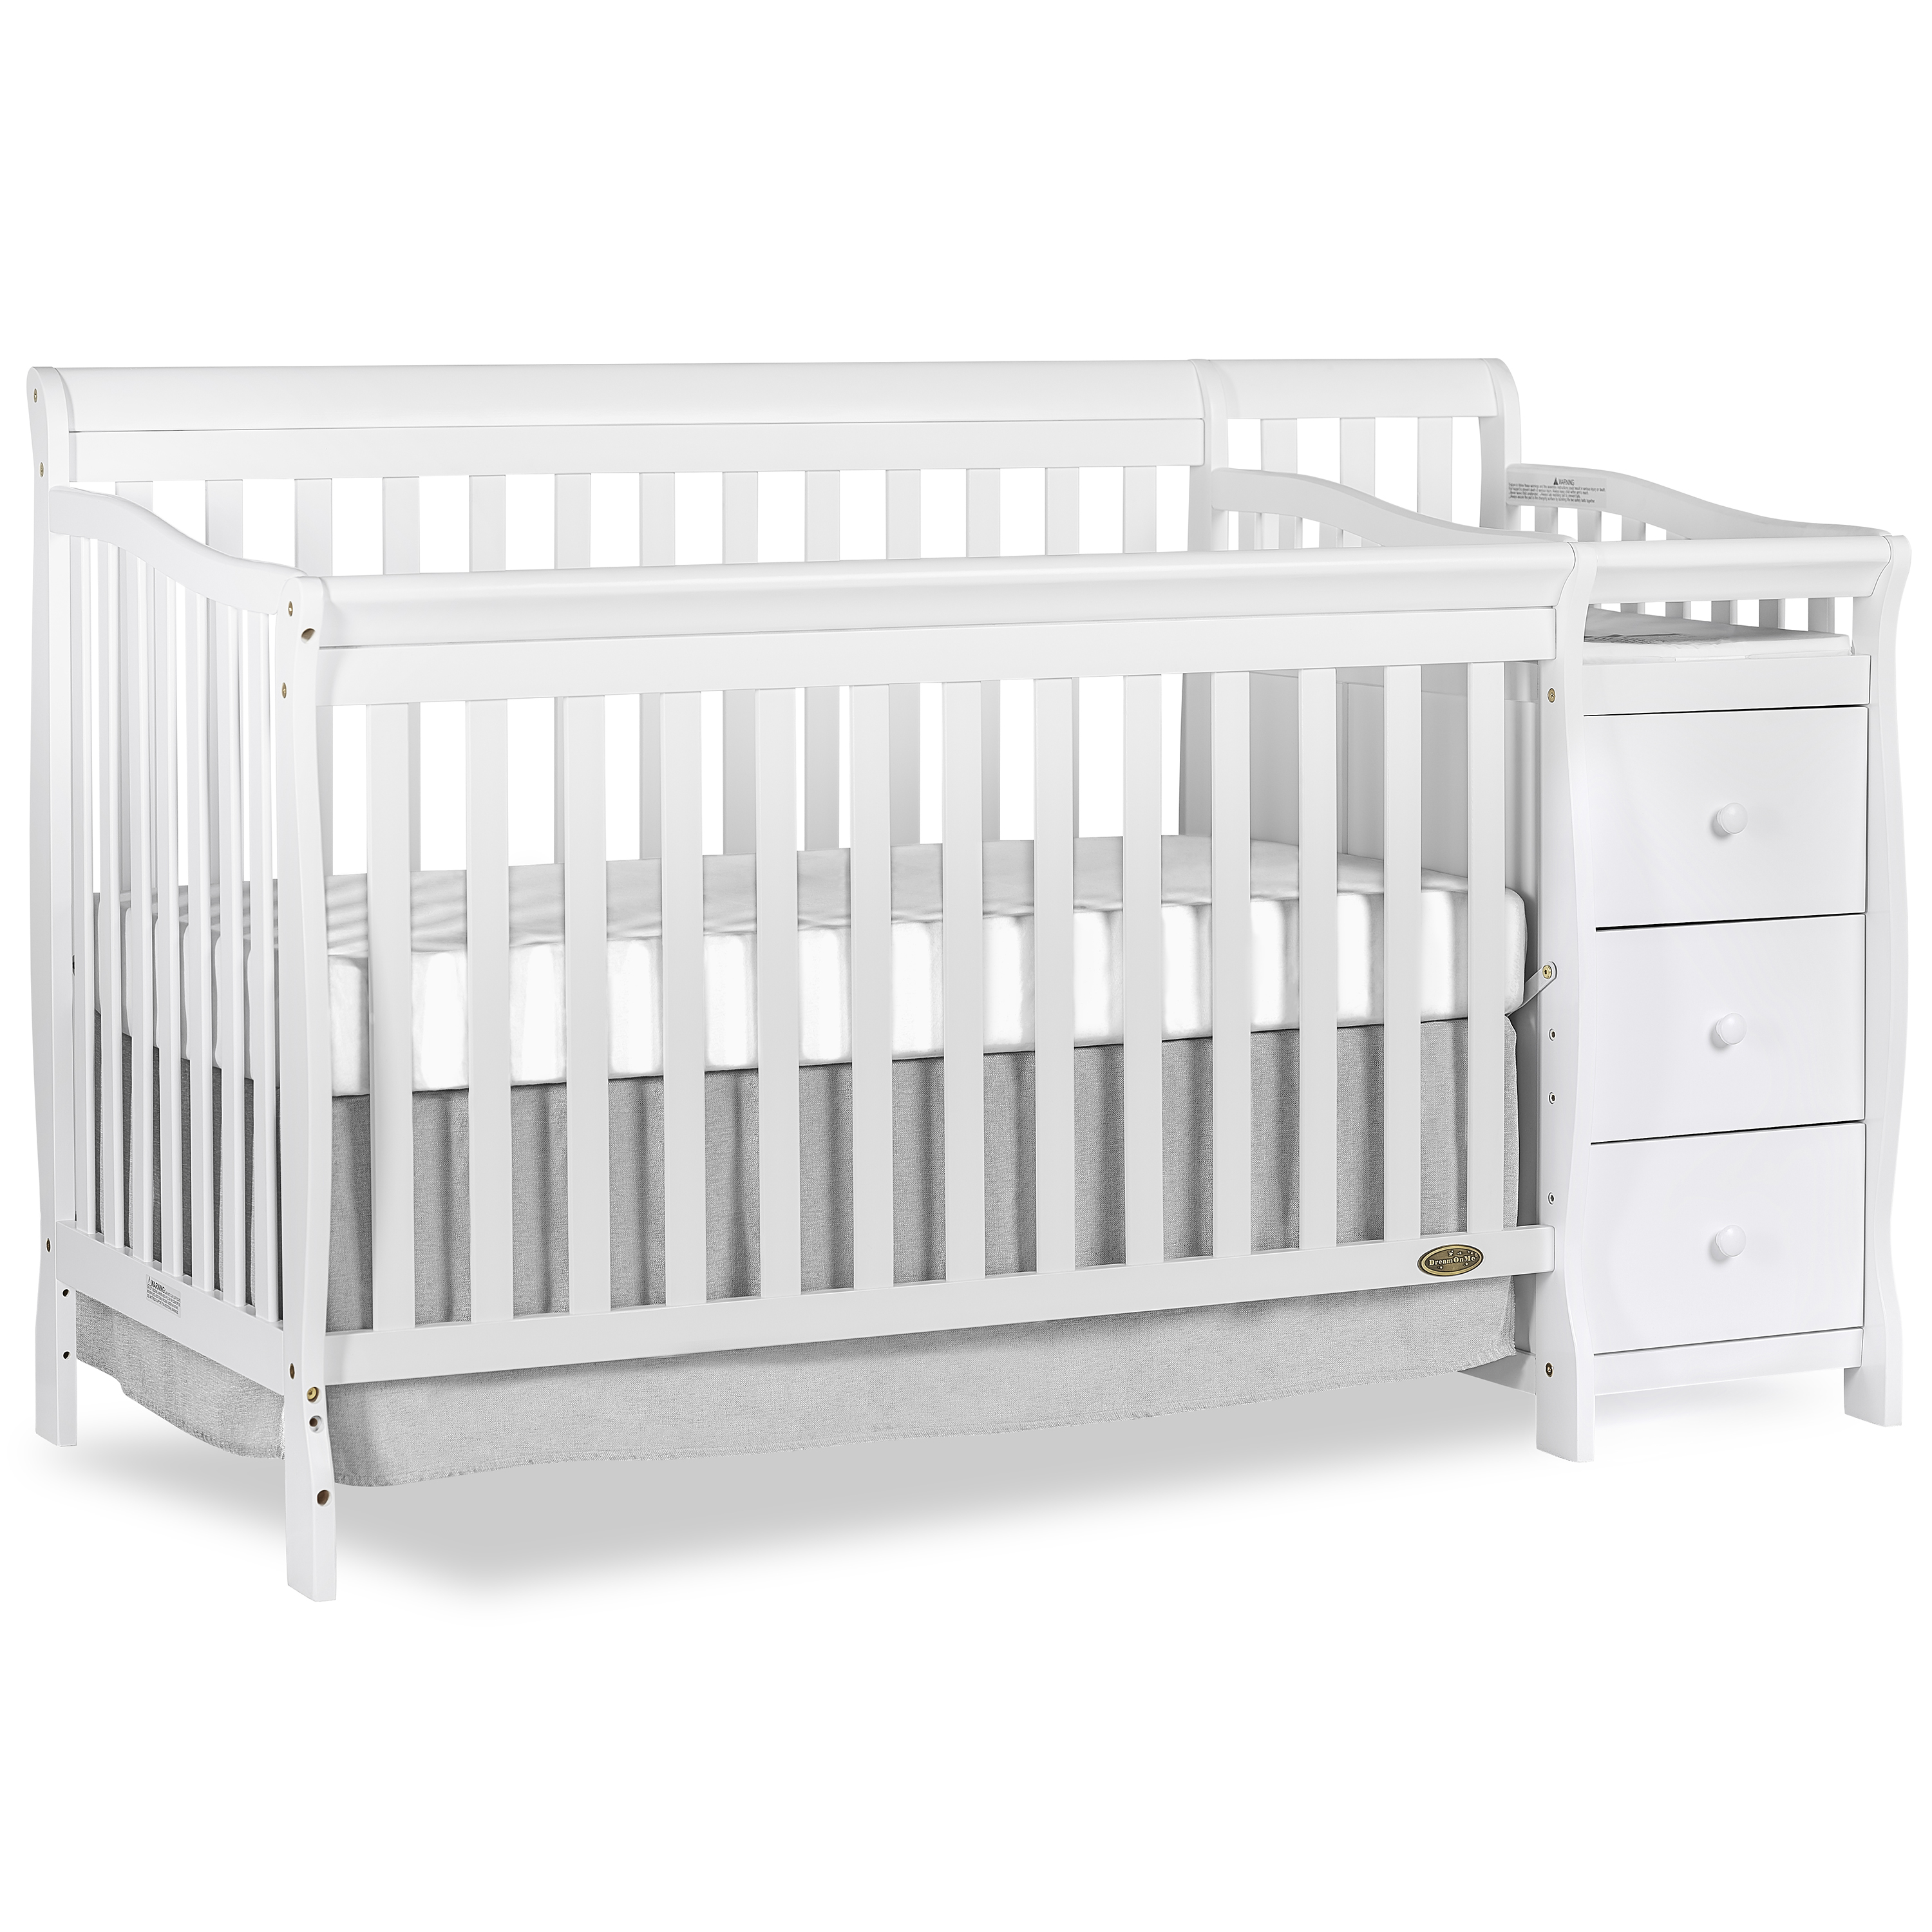 Dream On Me Brody 5-in-1 Convertible Crib with Changer, White - image 1 of 2